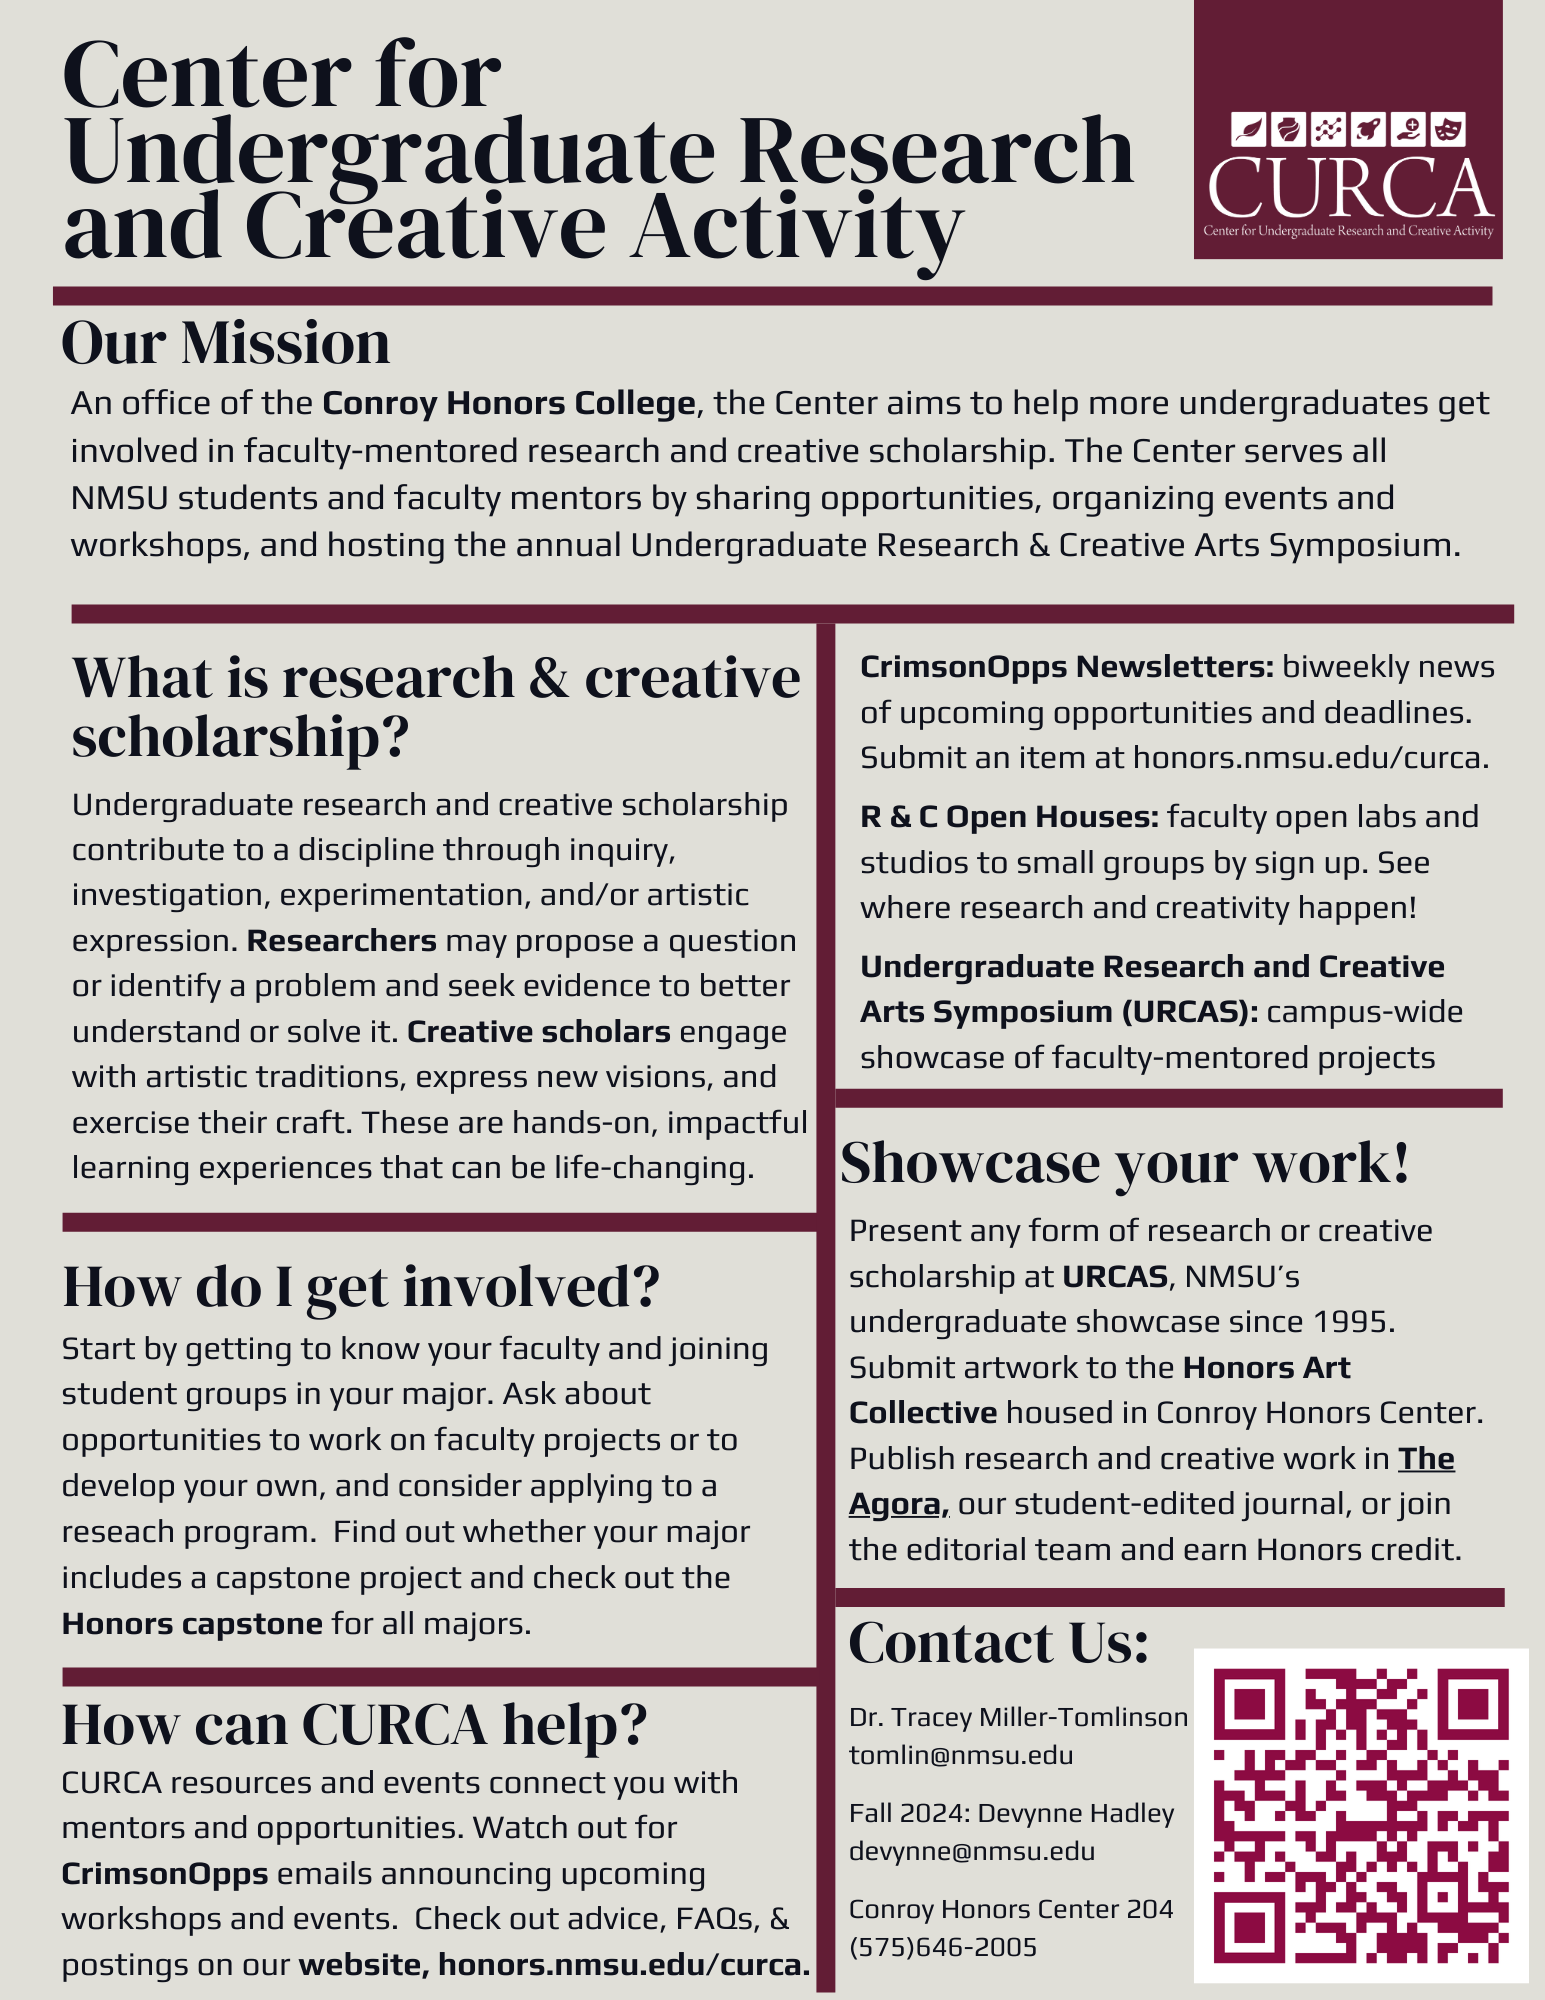 Overview of CURCA opportunities: workshops, open houses, symposium, art collective, and journal.